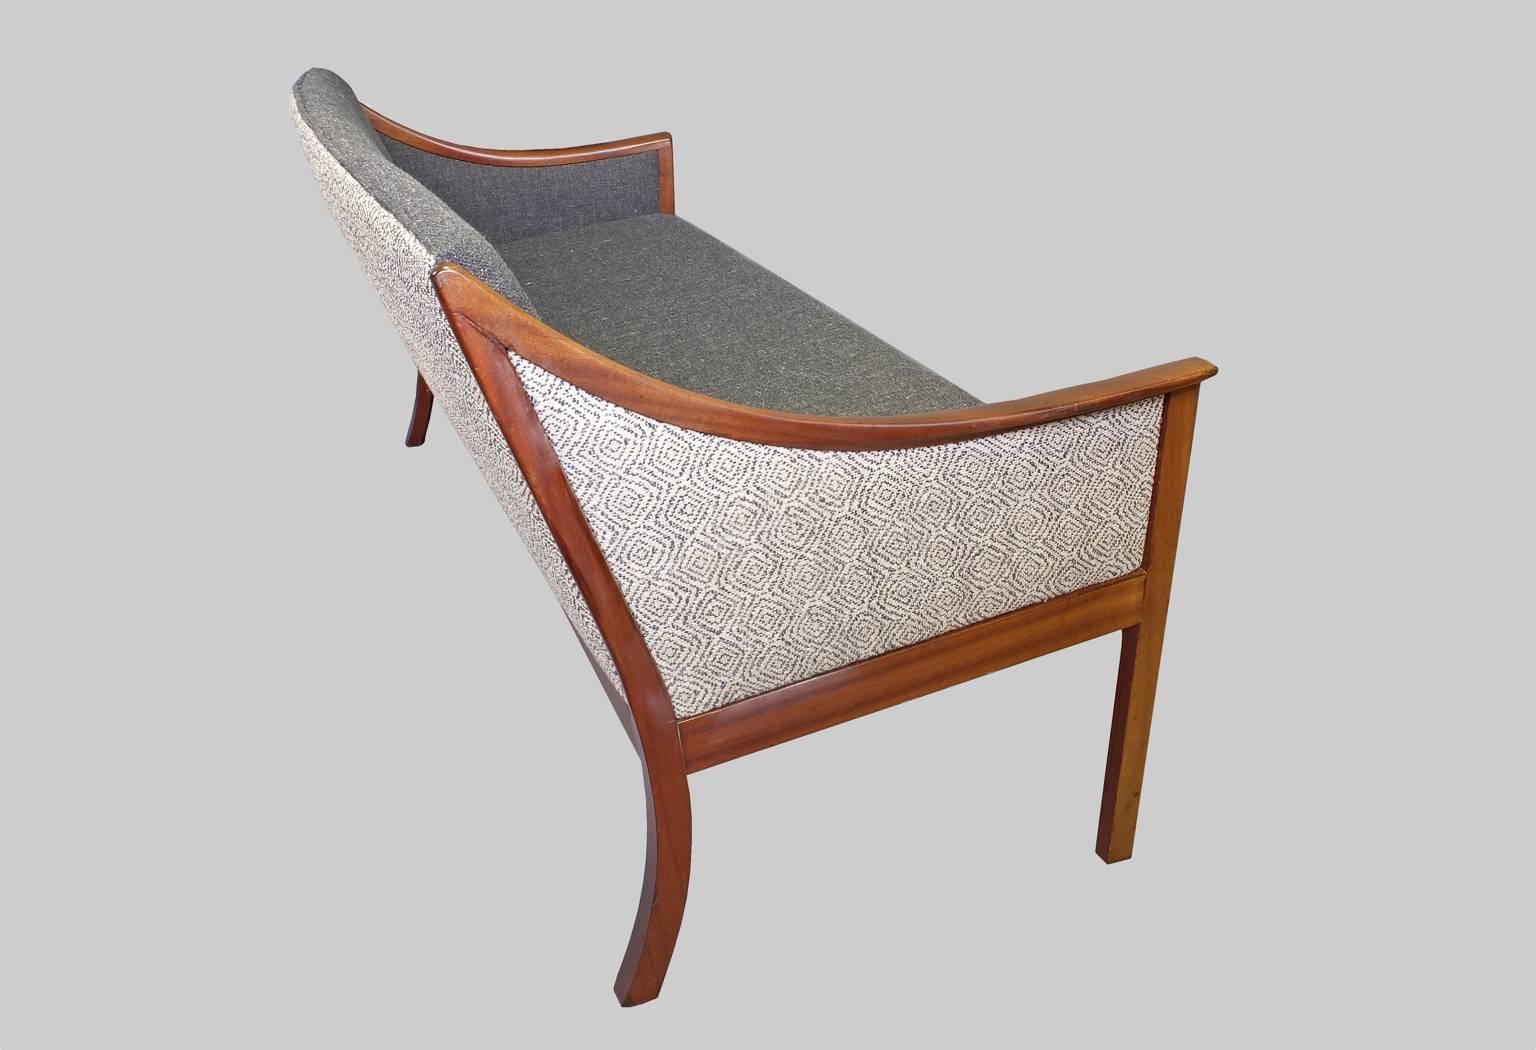 Fabric Ole Wanscher for Poul Jeppesen Mahogany Sofa and Pair of Lounge Chairs, 1950s